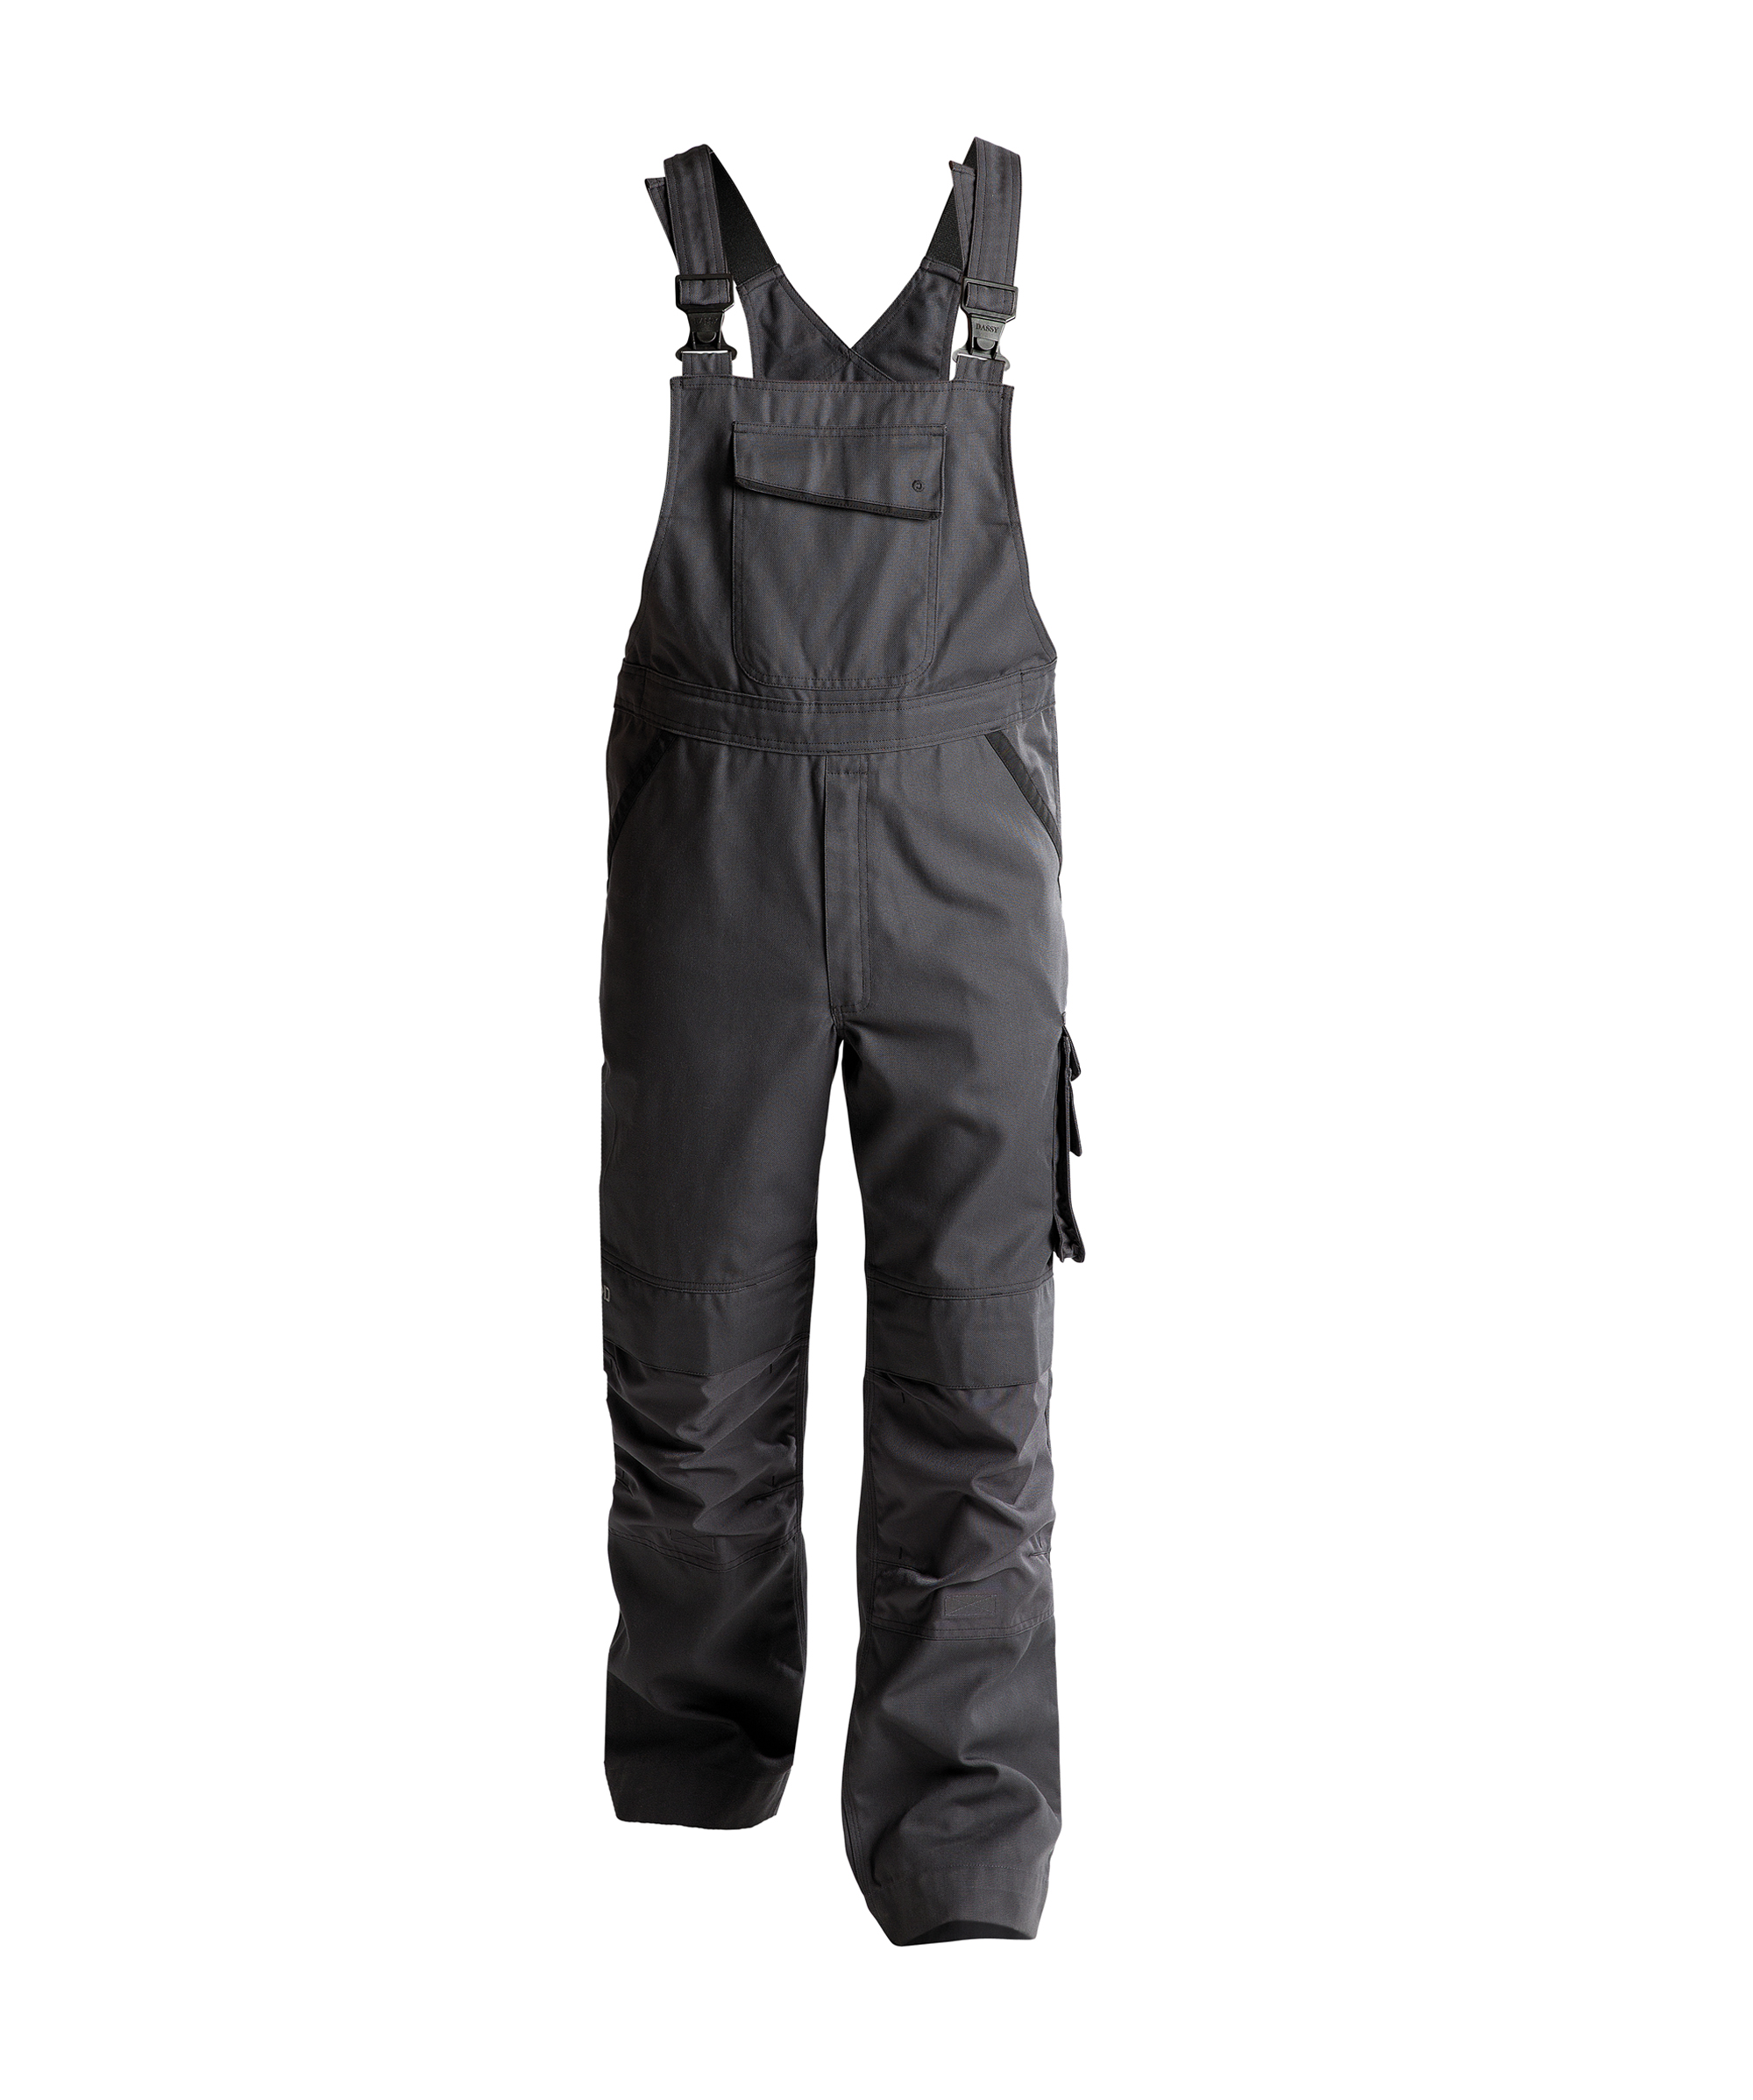 bolt_canvas-brace-overall-with-knee-pockets_anthracite-grey-black_front.jpg